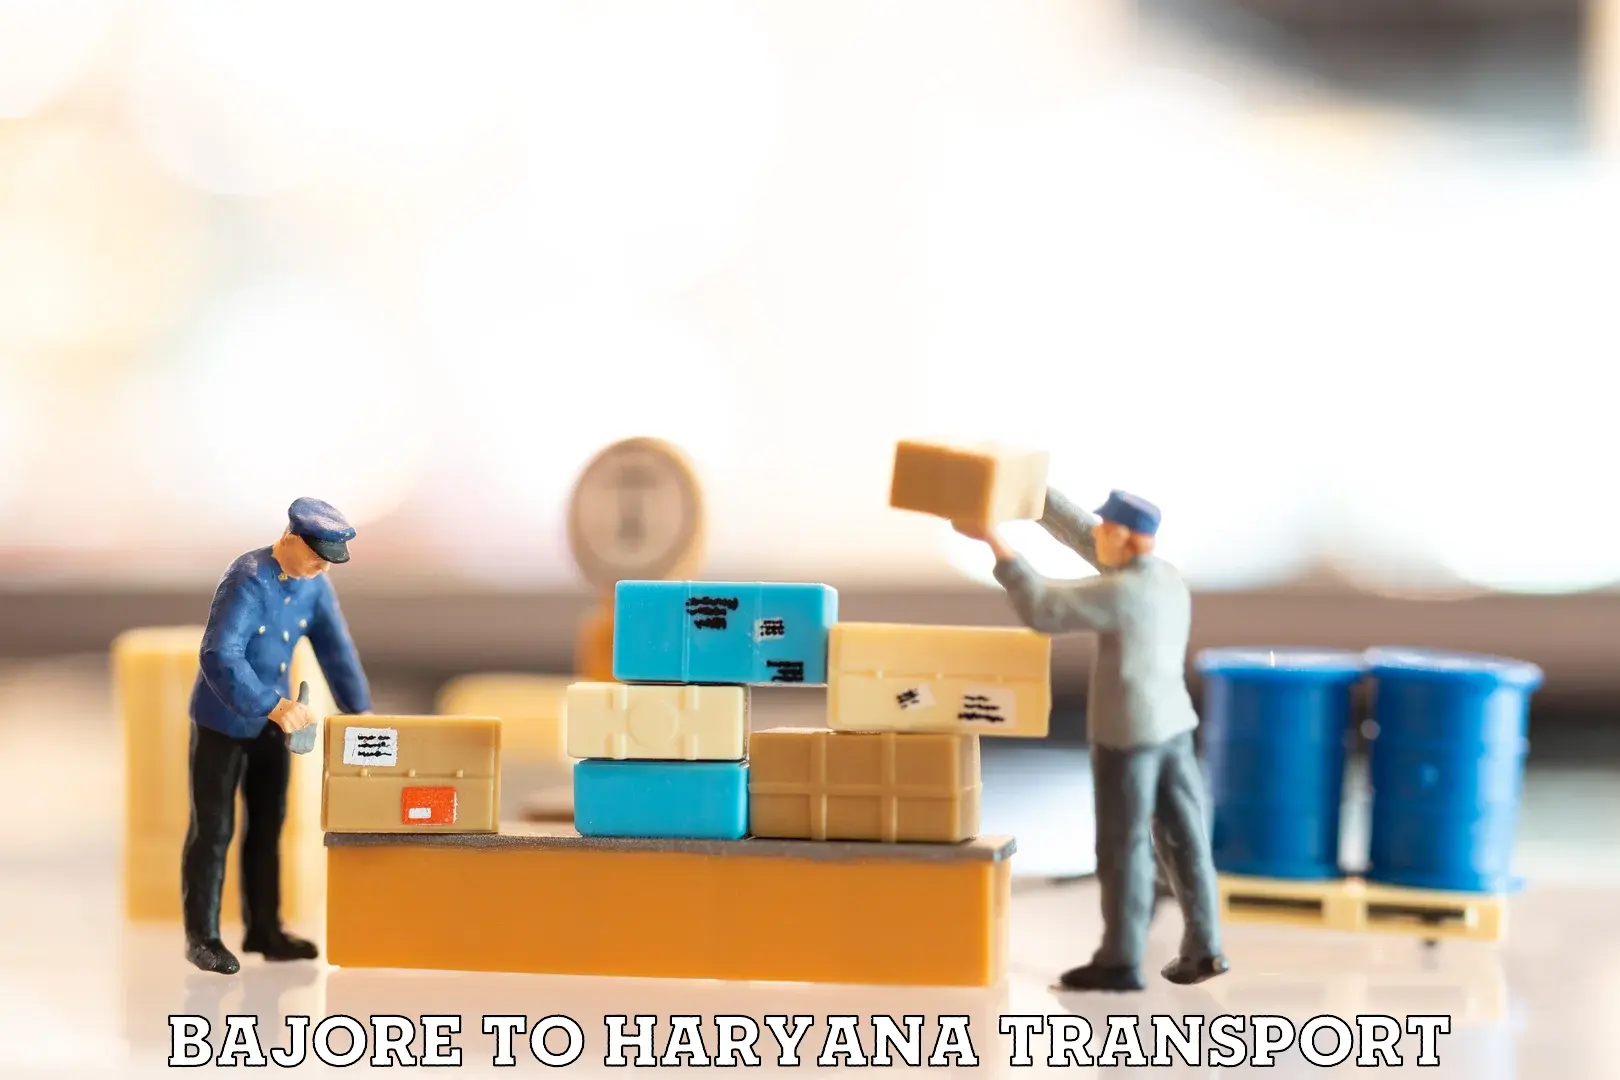 Commercial transport service Bajore to Haryana